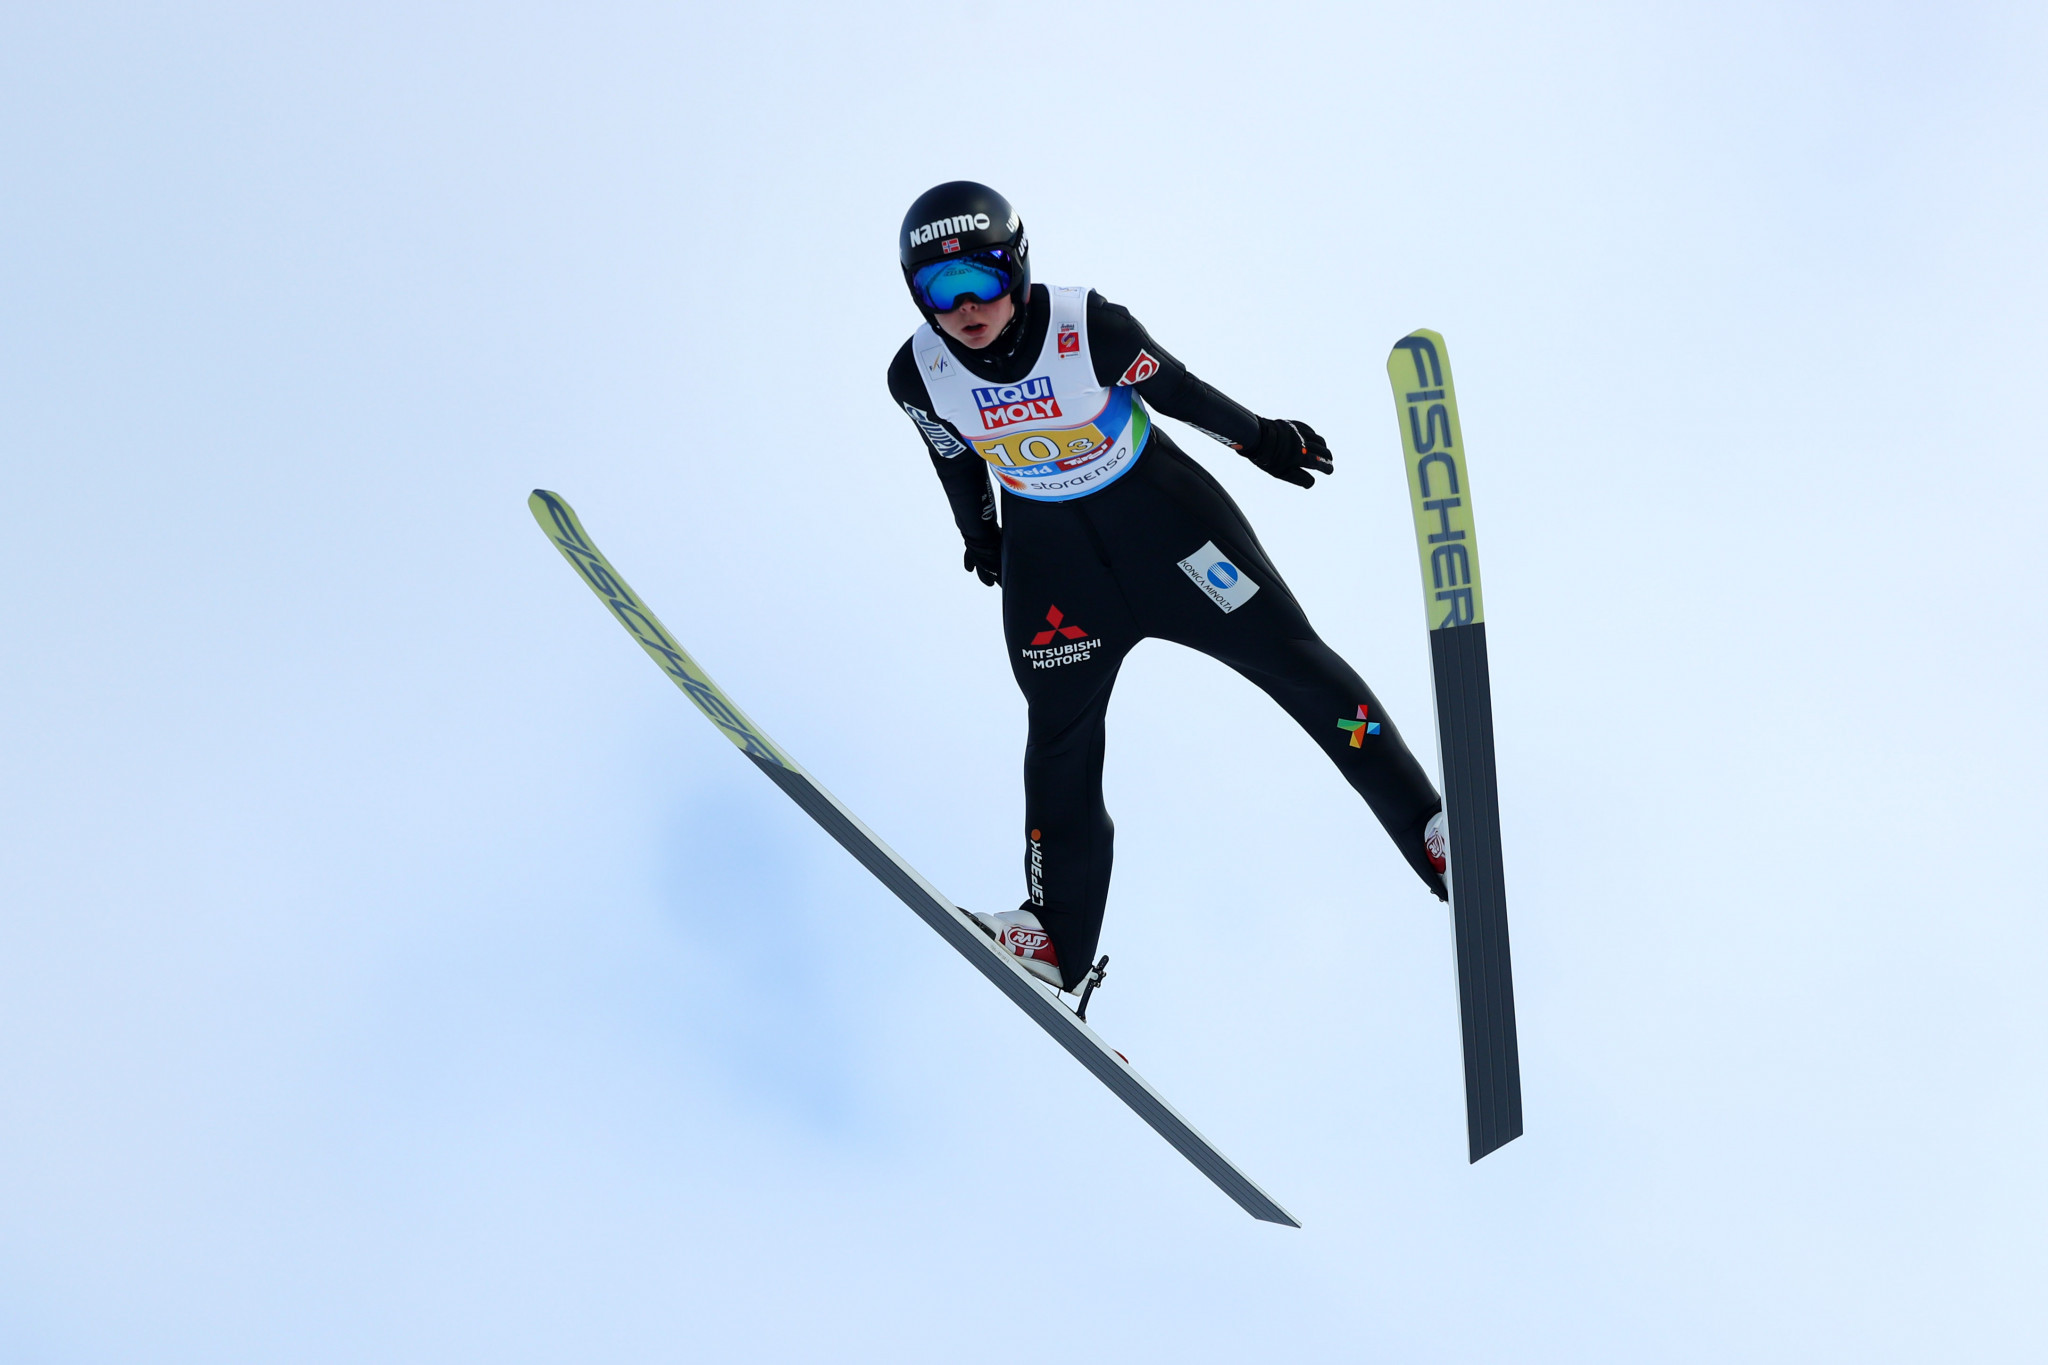 Olympc champion Maren Lundby of Norway will be competing at the FIS Ski Jumping World Cup event in Lillehammer ©Getty Images